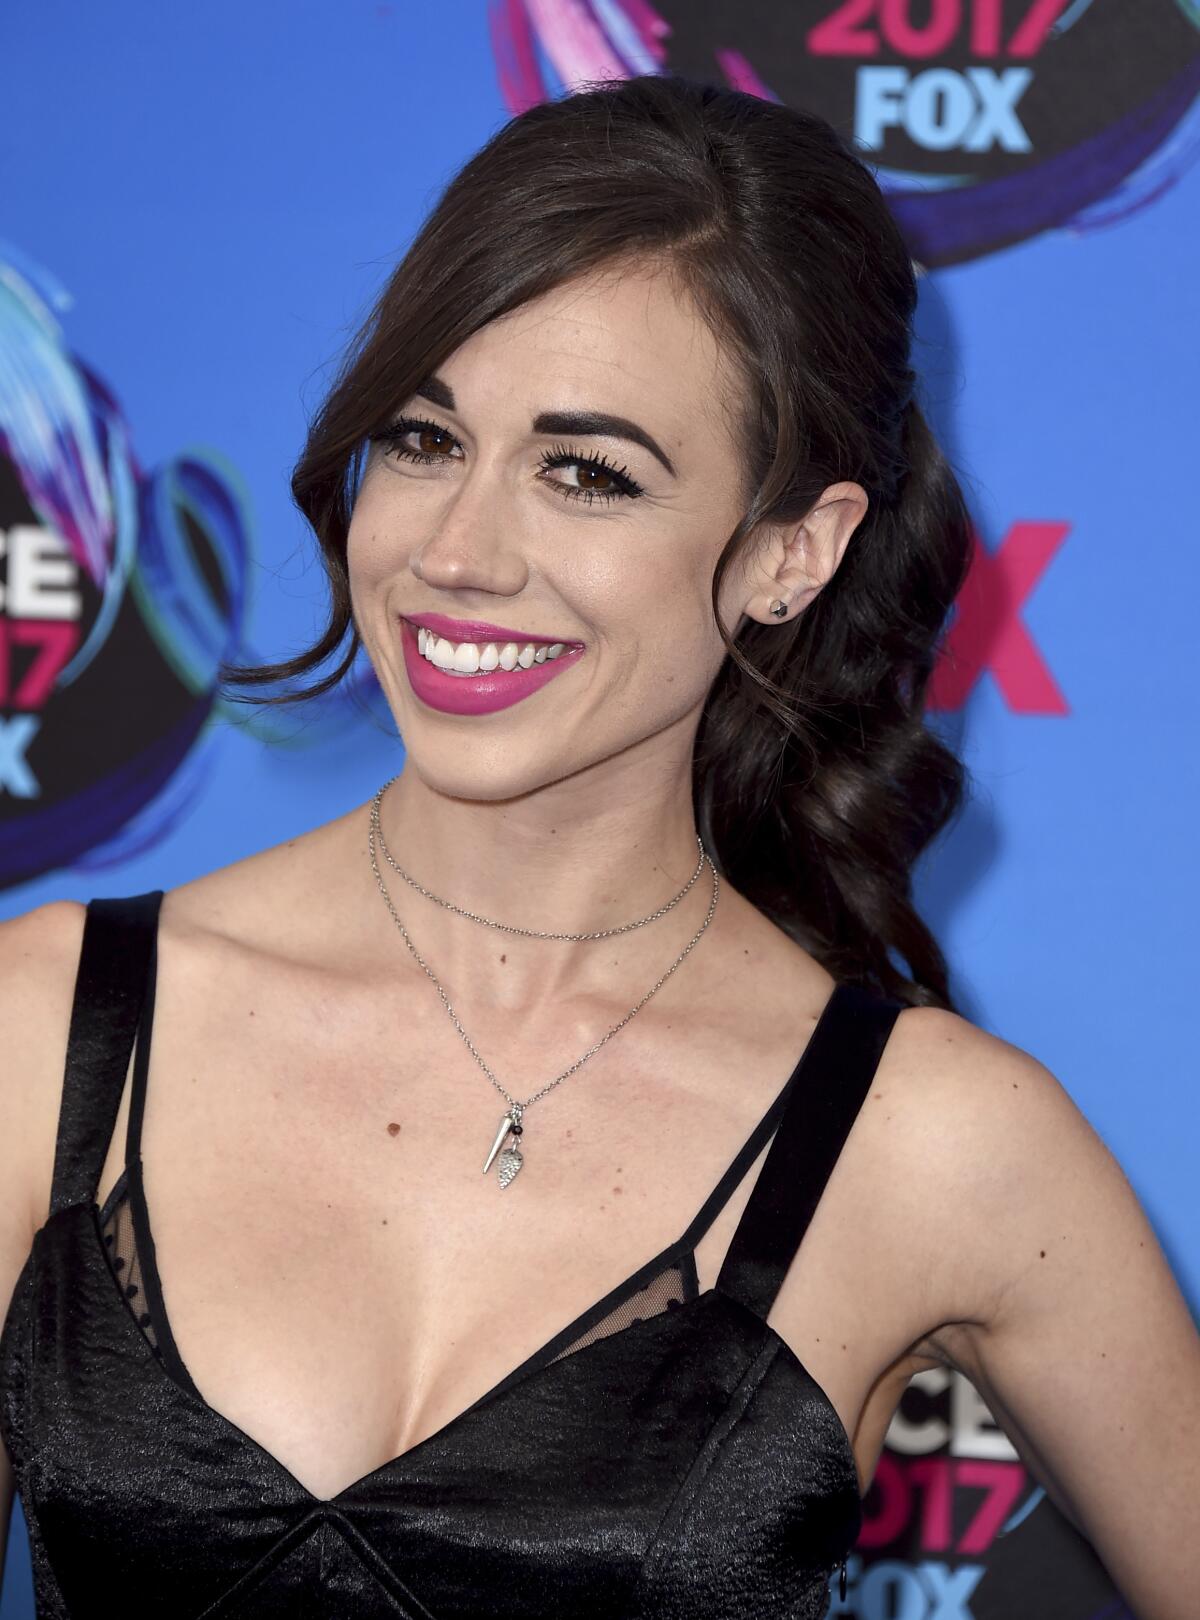 Colleen Ballinger with bangs and a ponytail wearing a strappy black dress against a blue backdrop.